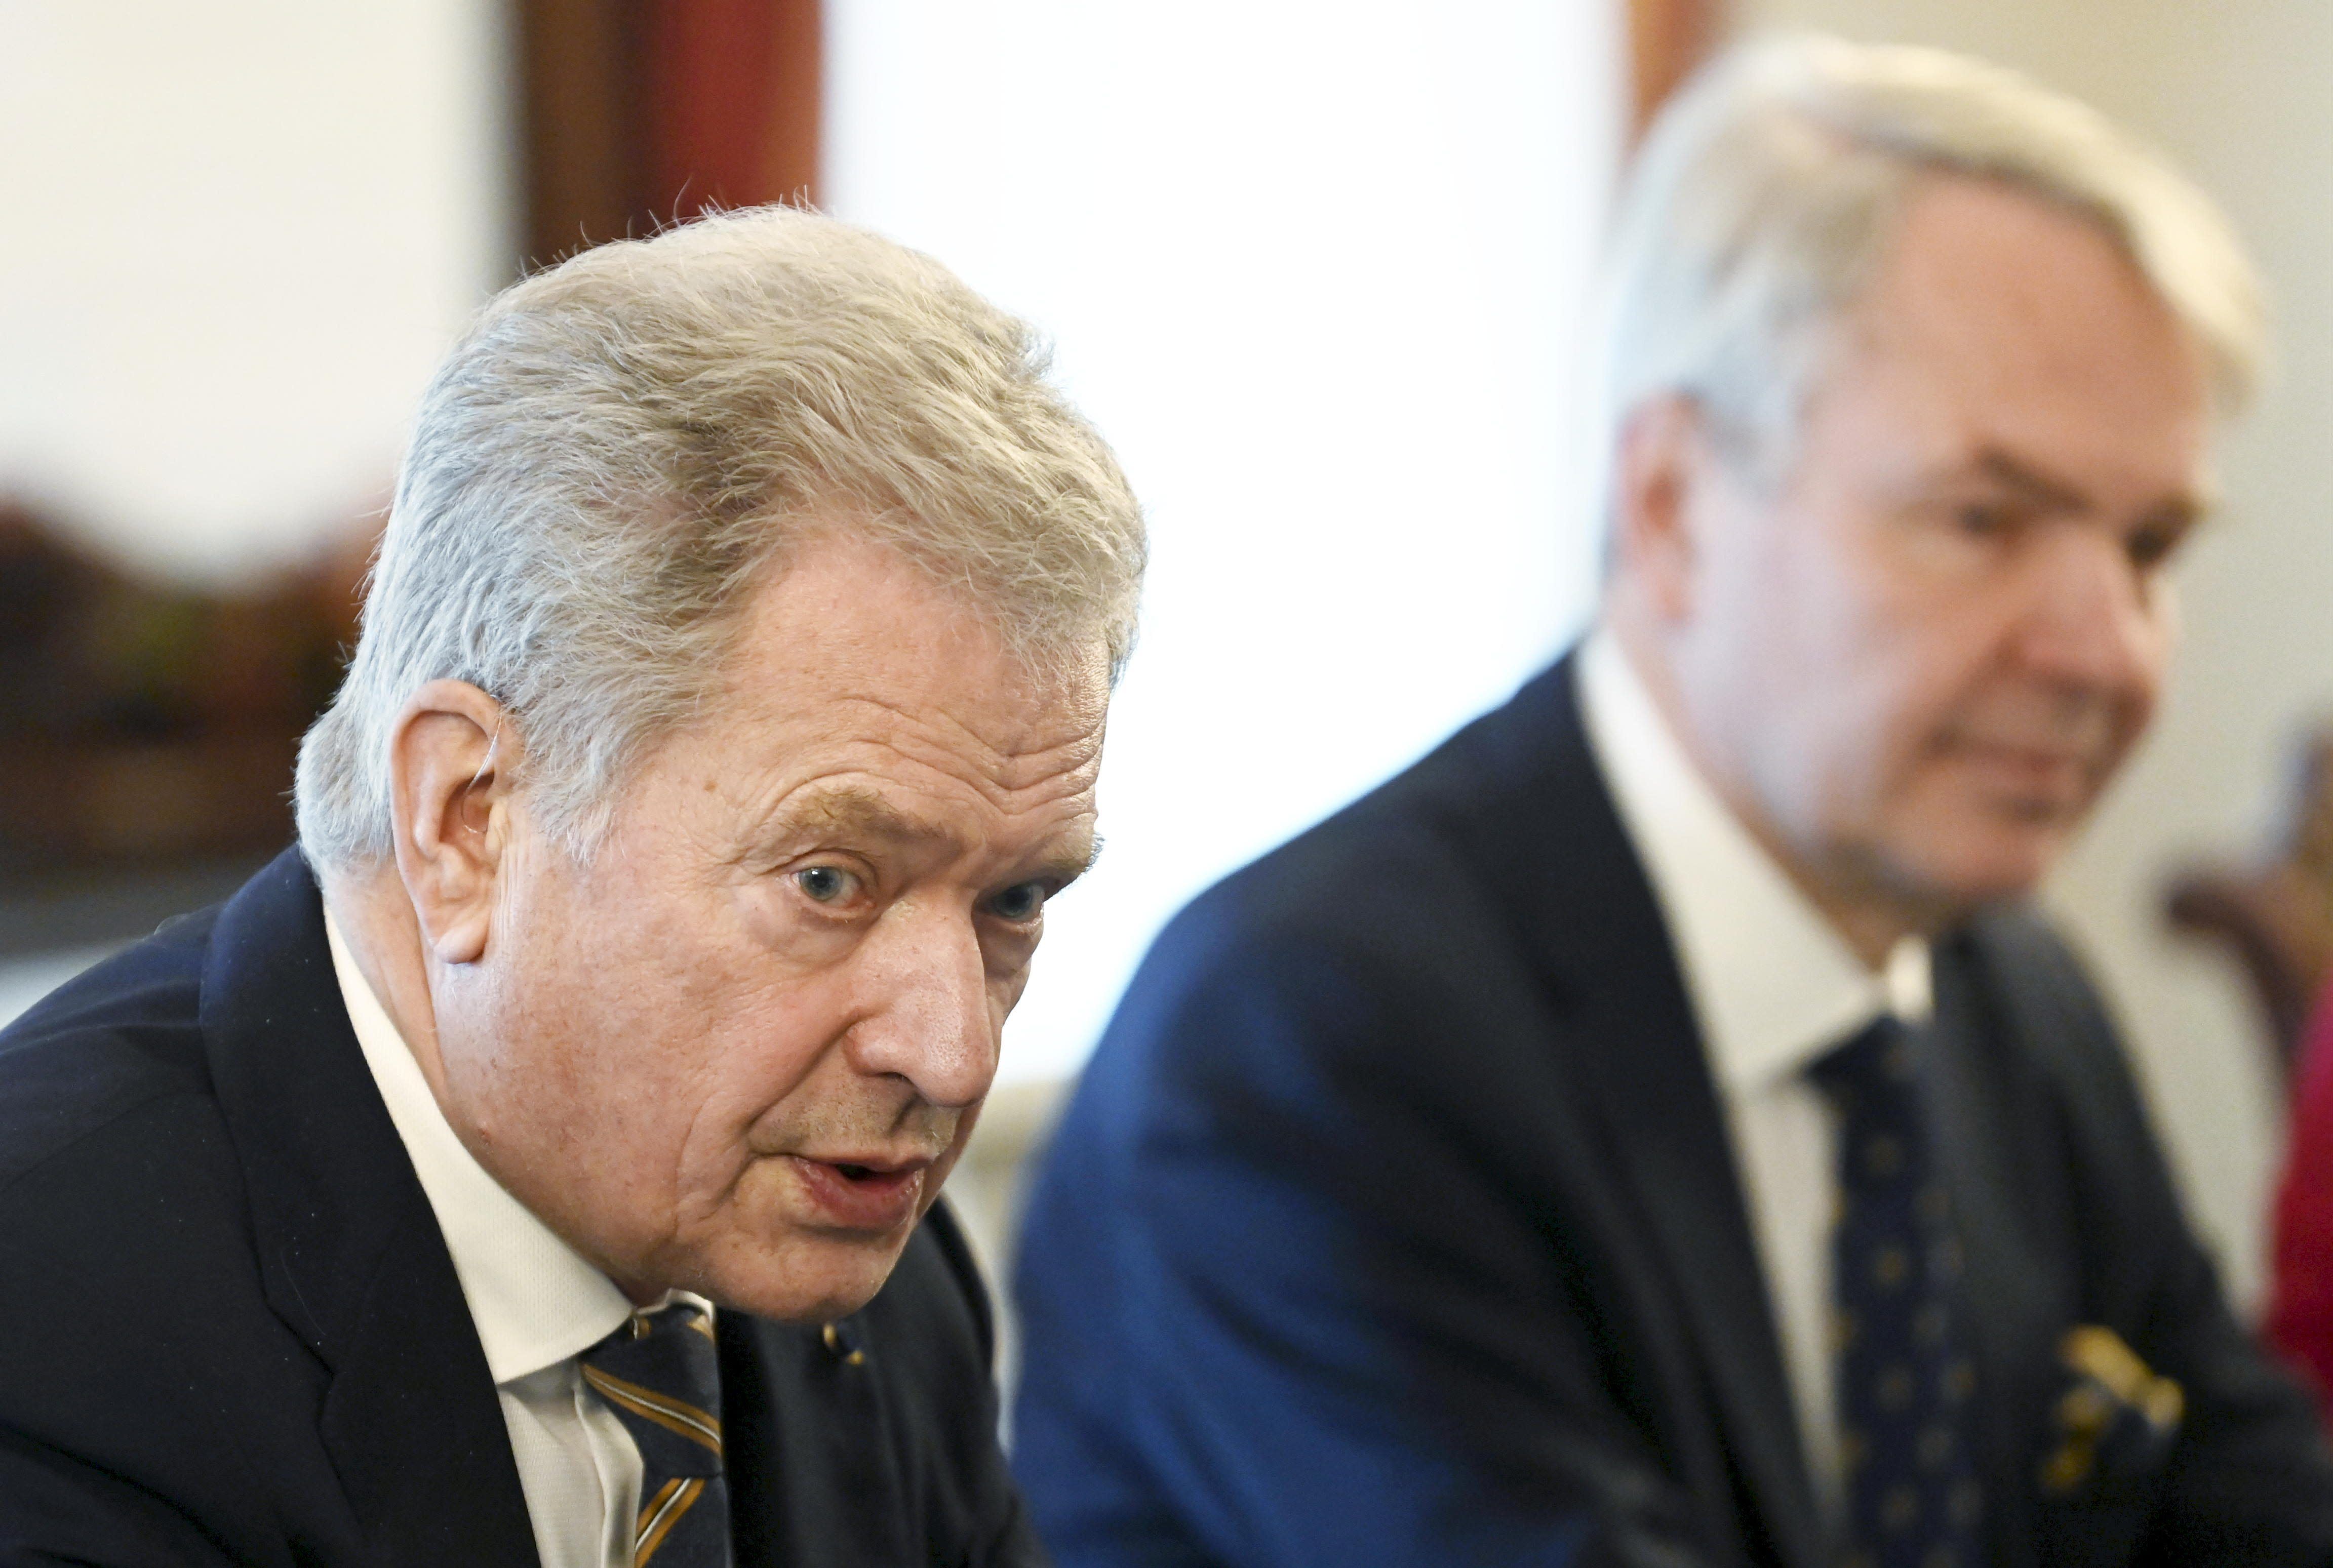 Niinistö demands a cool head as head of NATO, Poland suggests that the rocket came from Ukraine